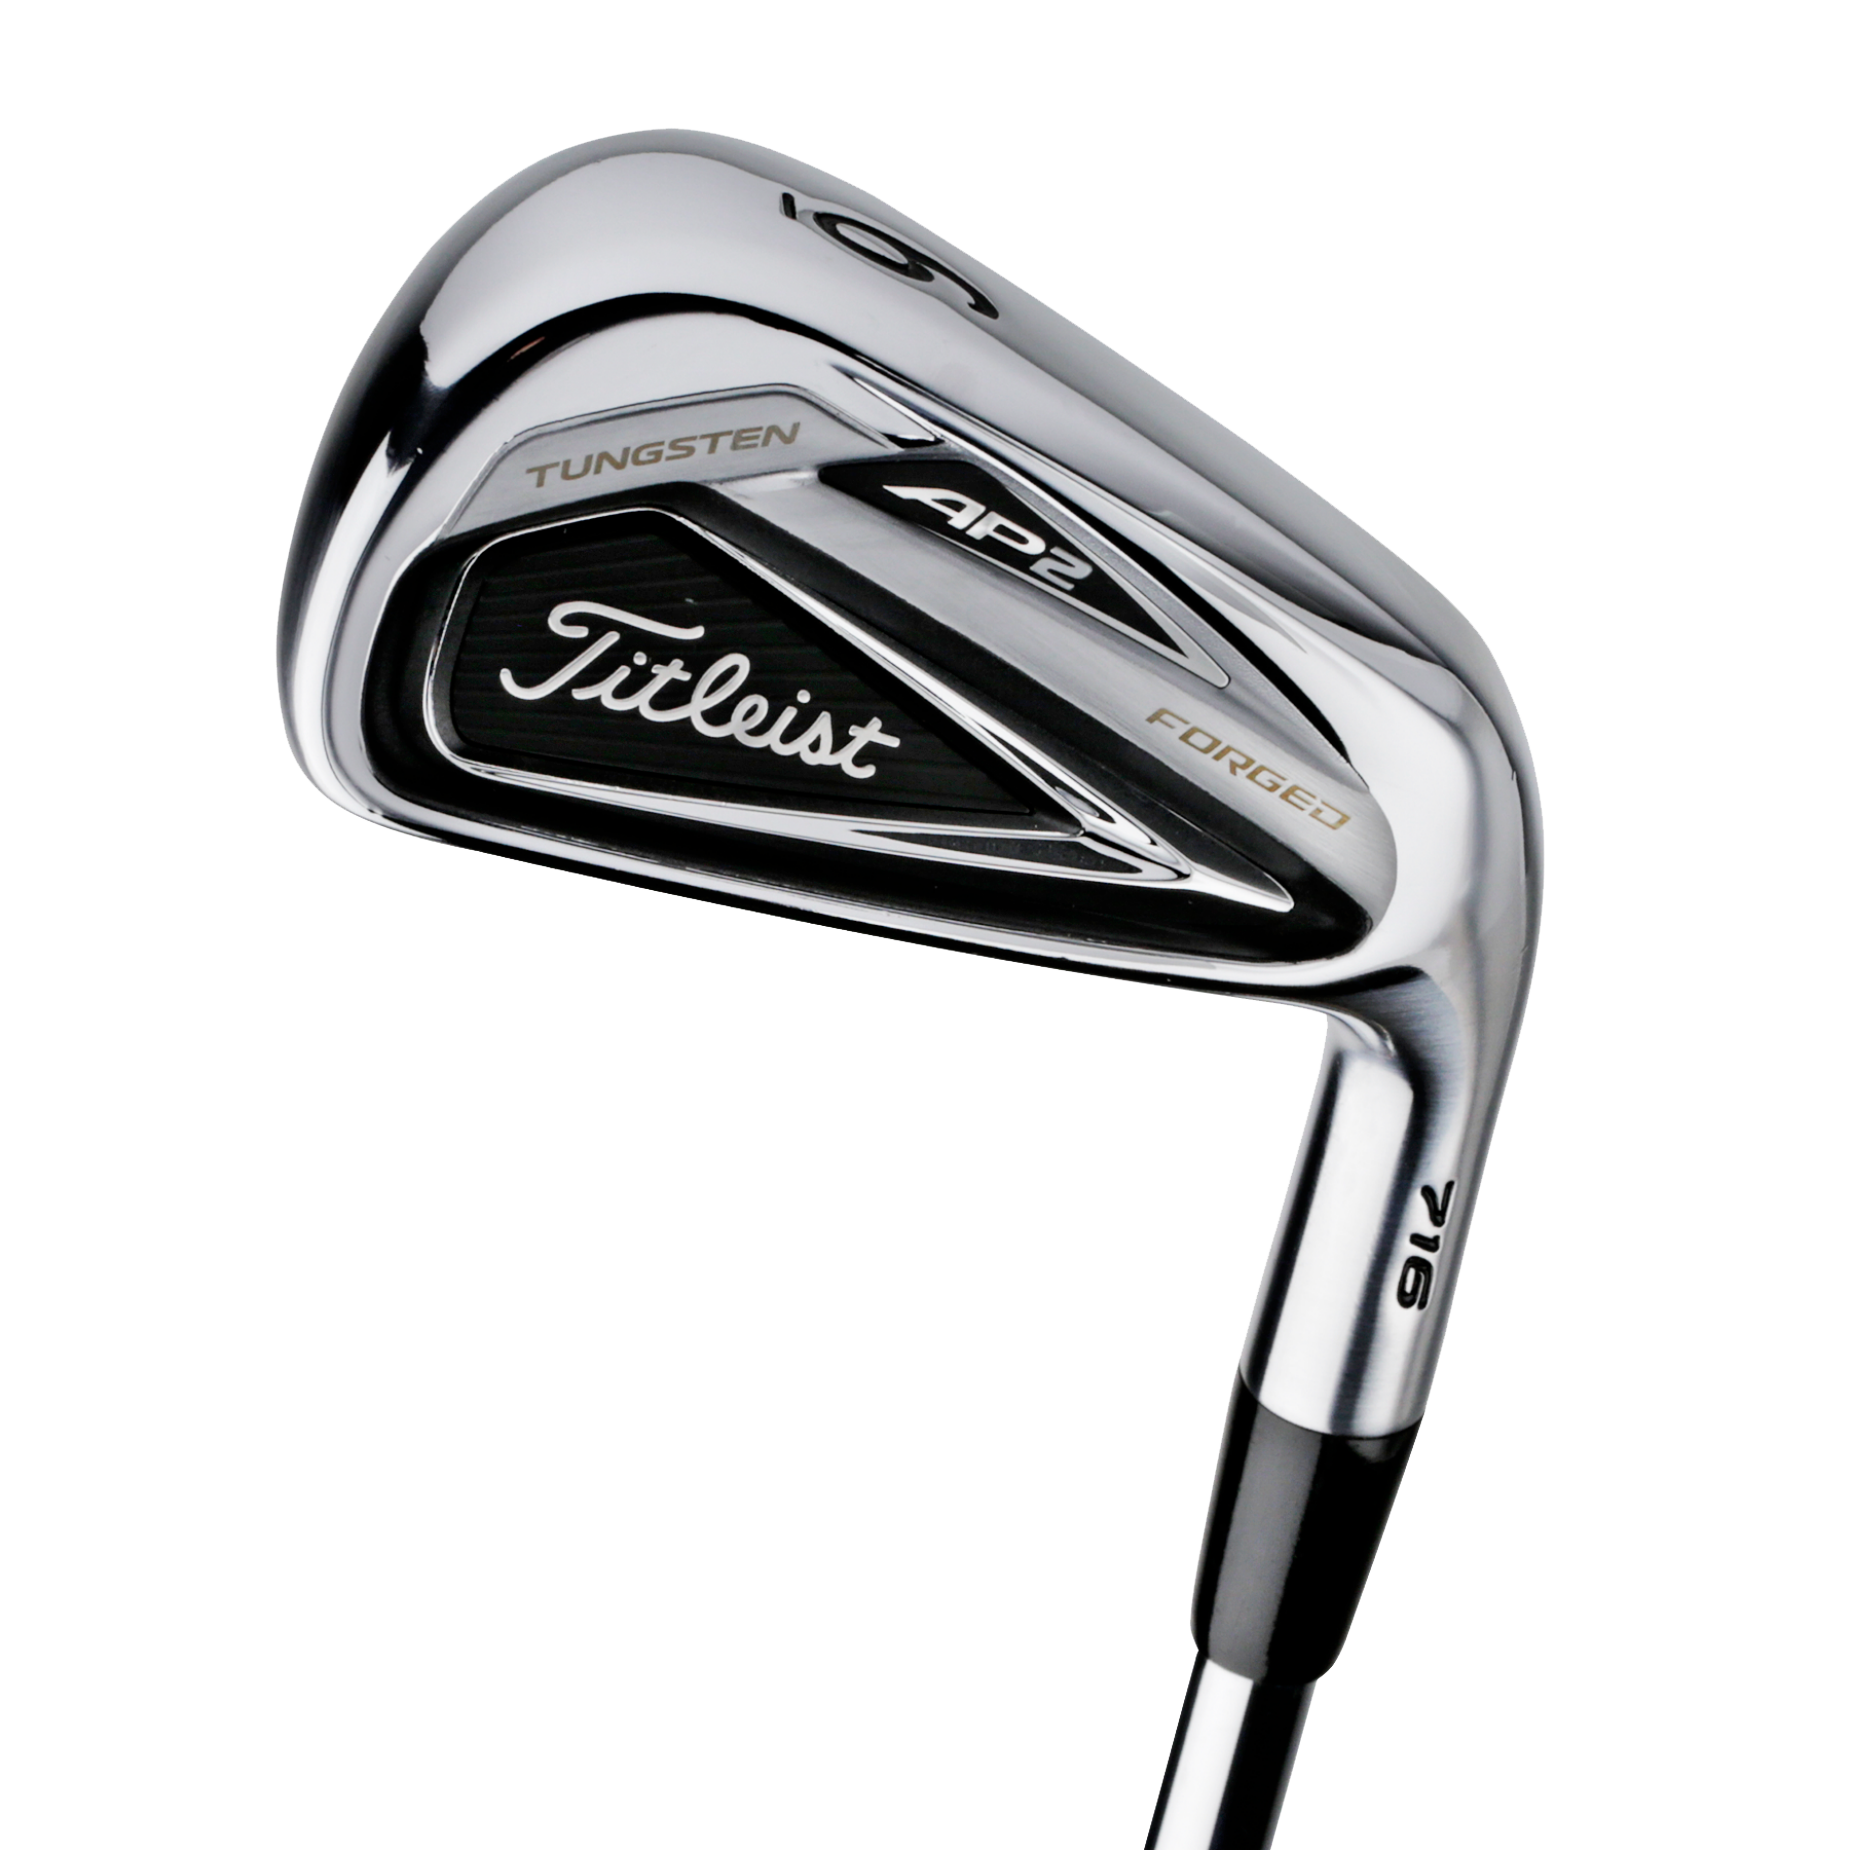 0317-Players-Irons-Beauty-Titleist.716AP2-tout.png